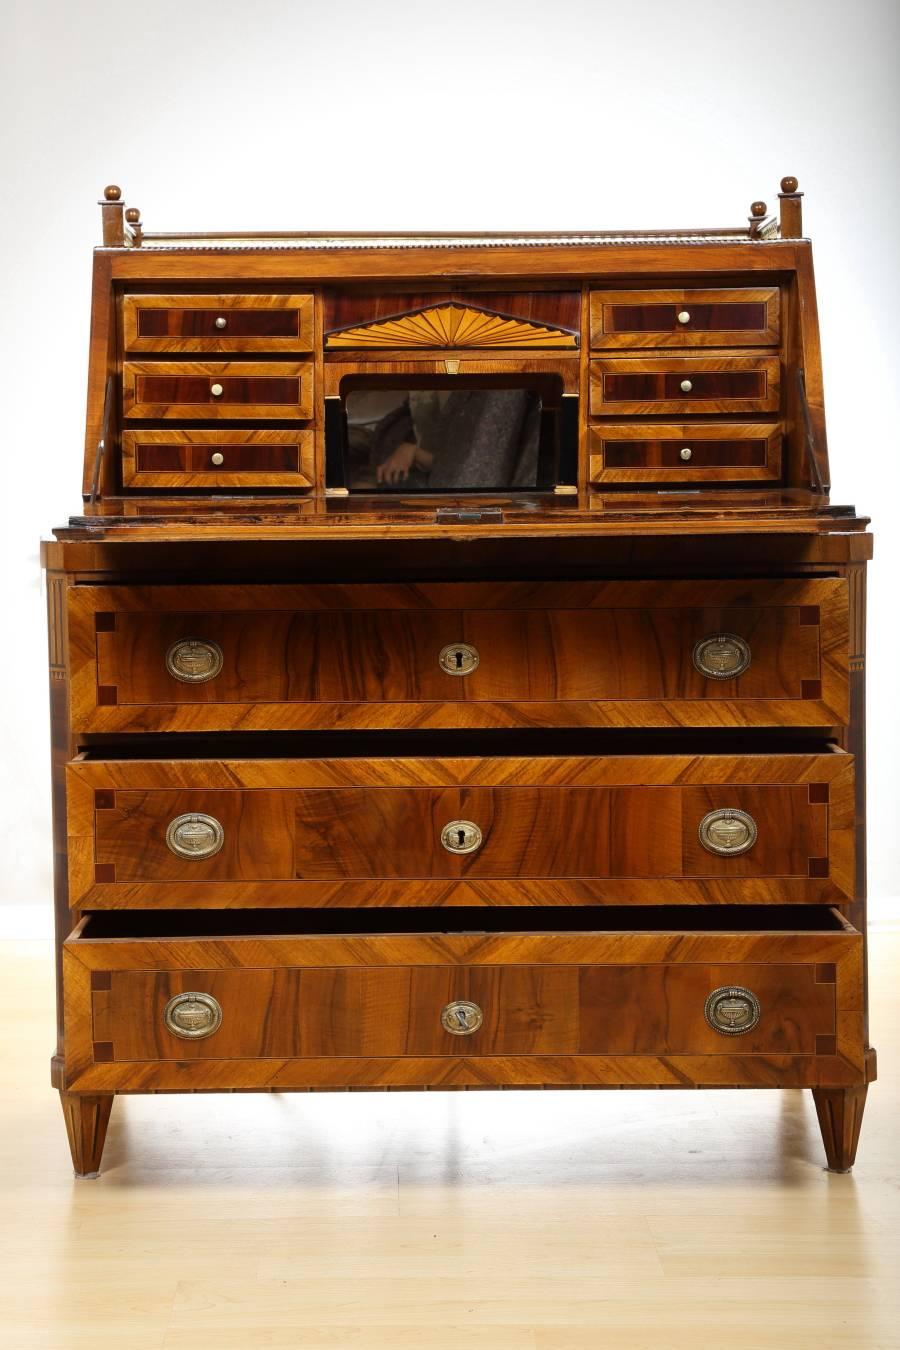 Early 19th century Empire fall-front secretaire in walnut, circa 1810. This unique piece has six small drawers, three large drawers, and additional compartment doubling as a safe. The secretaire also features a mirror and inlay board. It has been